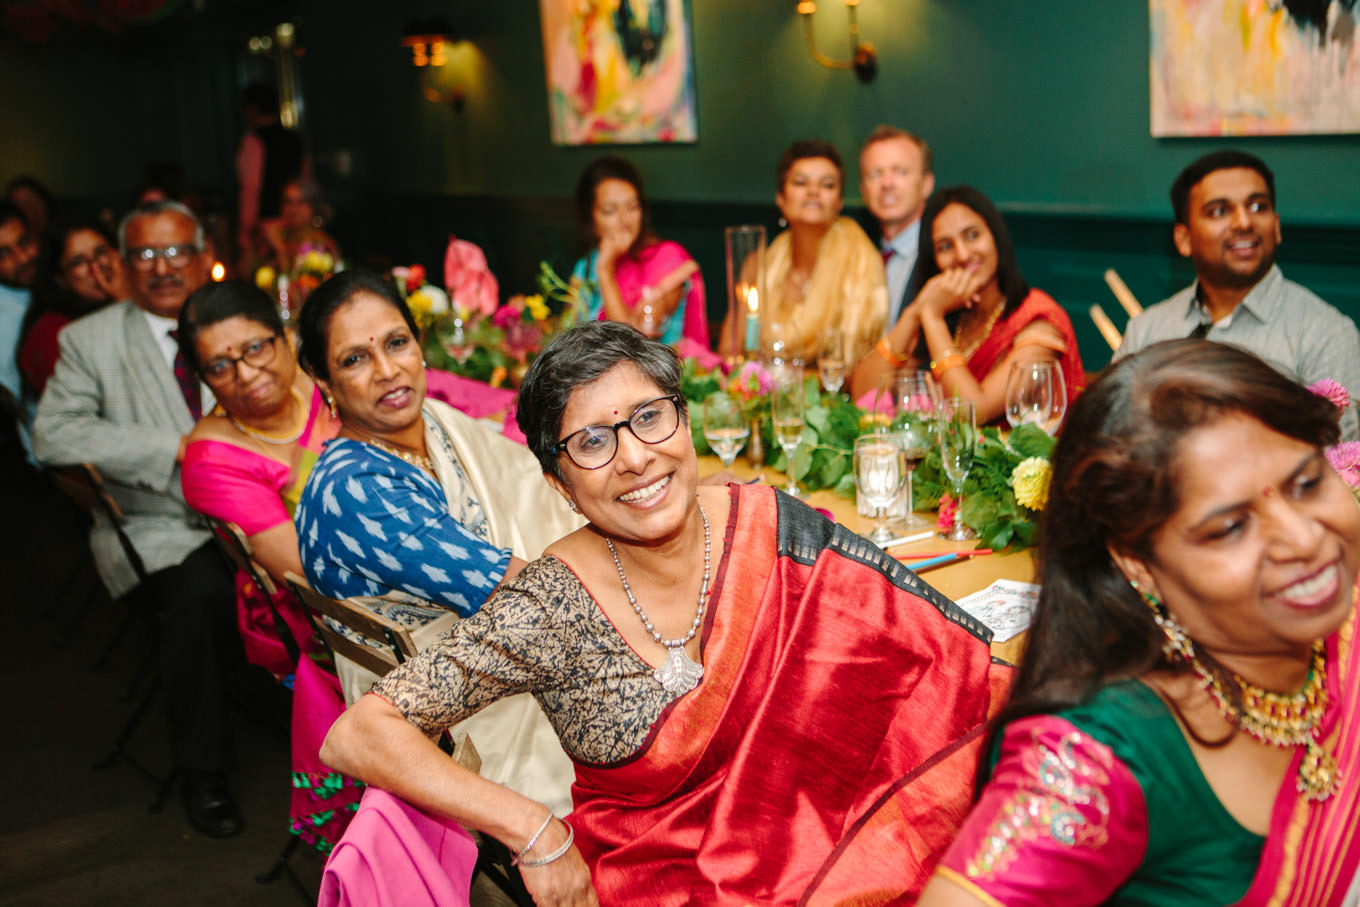 Wedding guests listening to speeches. Two Disney artists create a unique and colorful Indian Fusion wedding at The Fig House Los Angeles, featured on Green Wedding Shoes. | Colorful and elevated wedding inspiration for fun-loving couples in Southern California | #indianwedding #indianfusionwedding #thefighouse #losangeleswedding   Source: Mary Costa Photography | Los Angeles